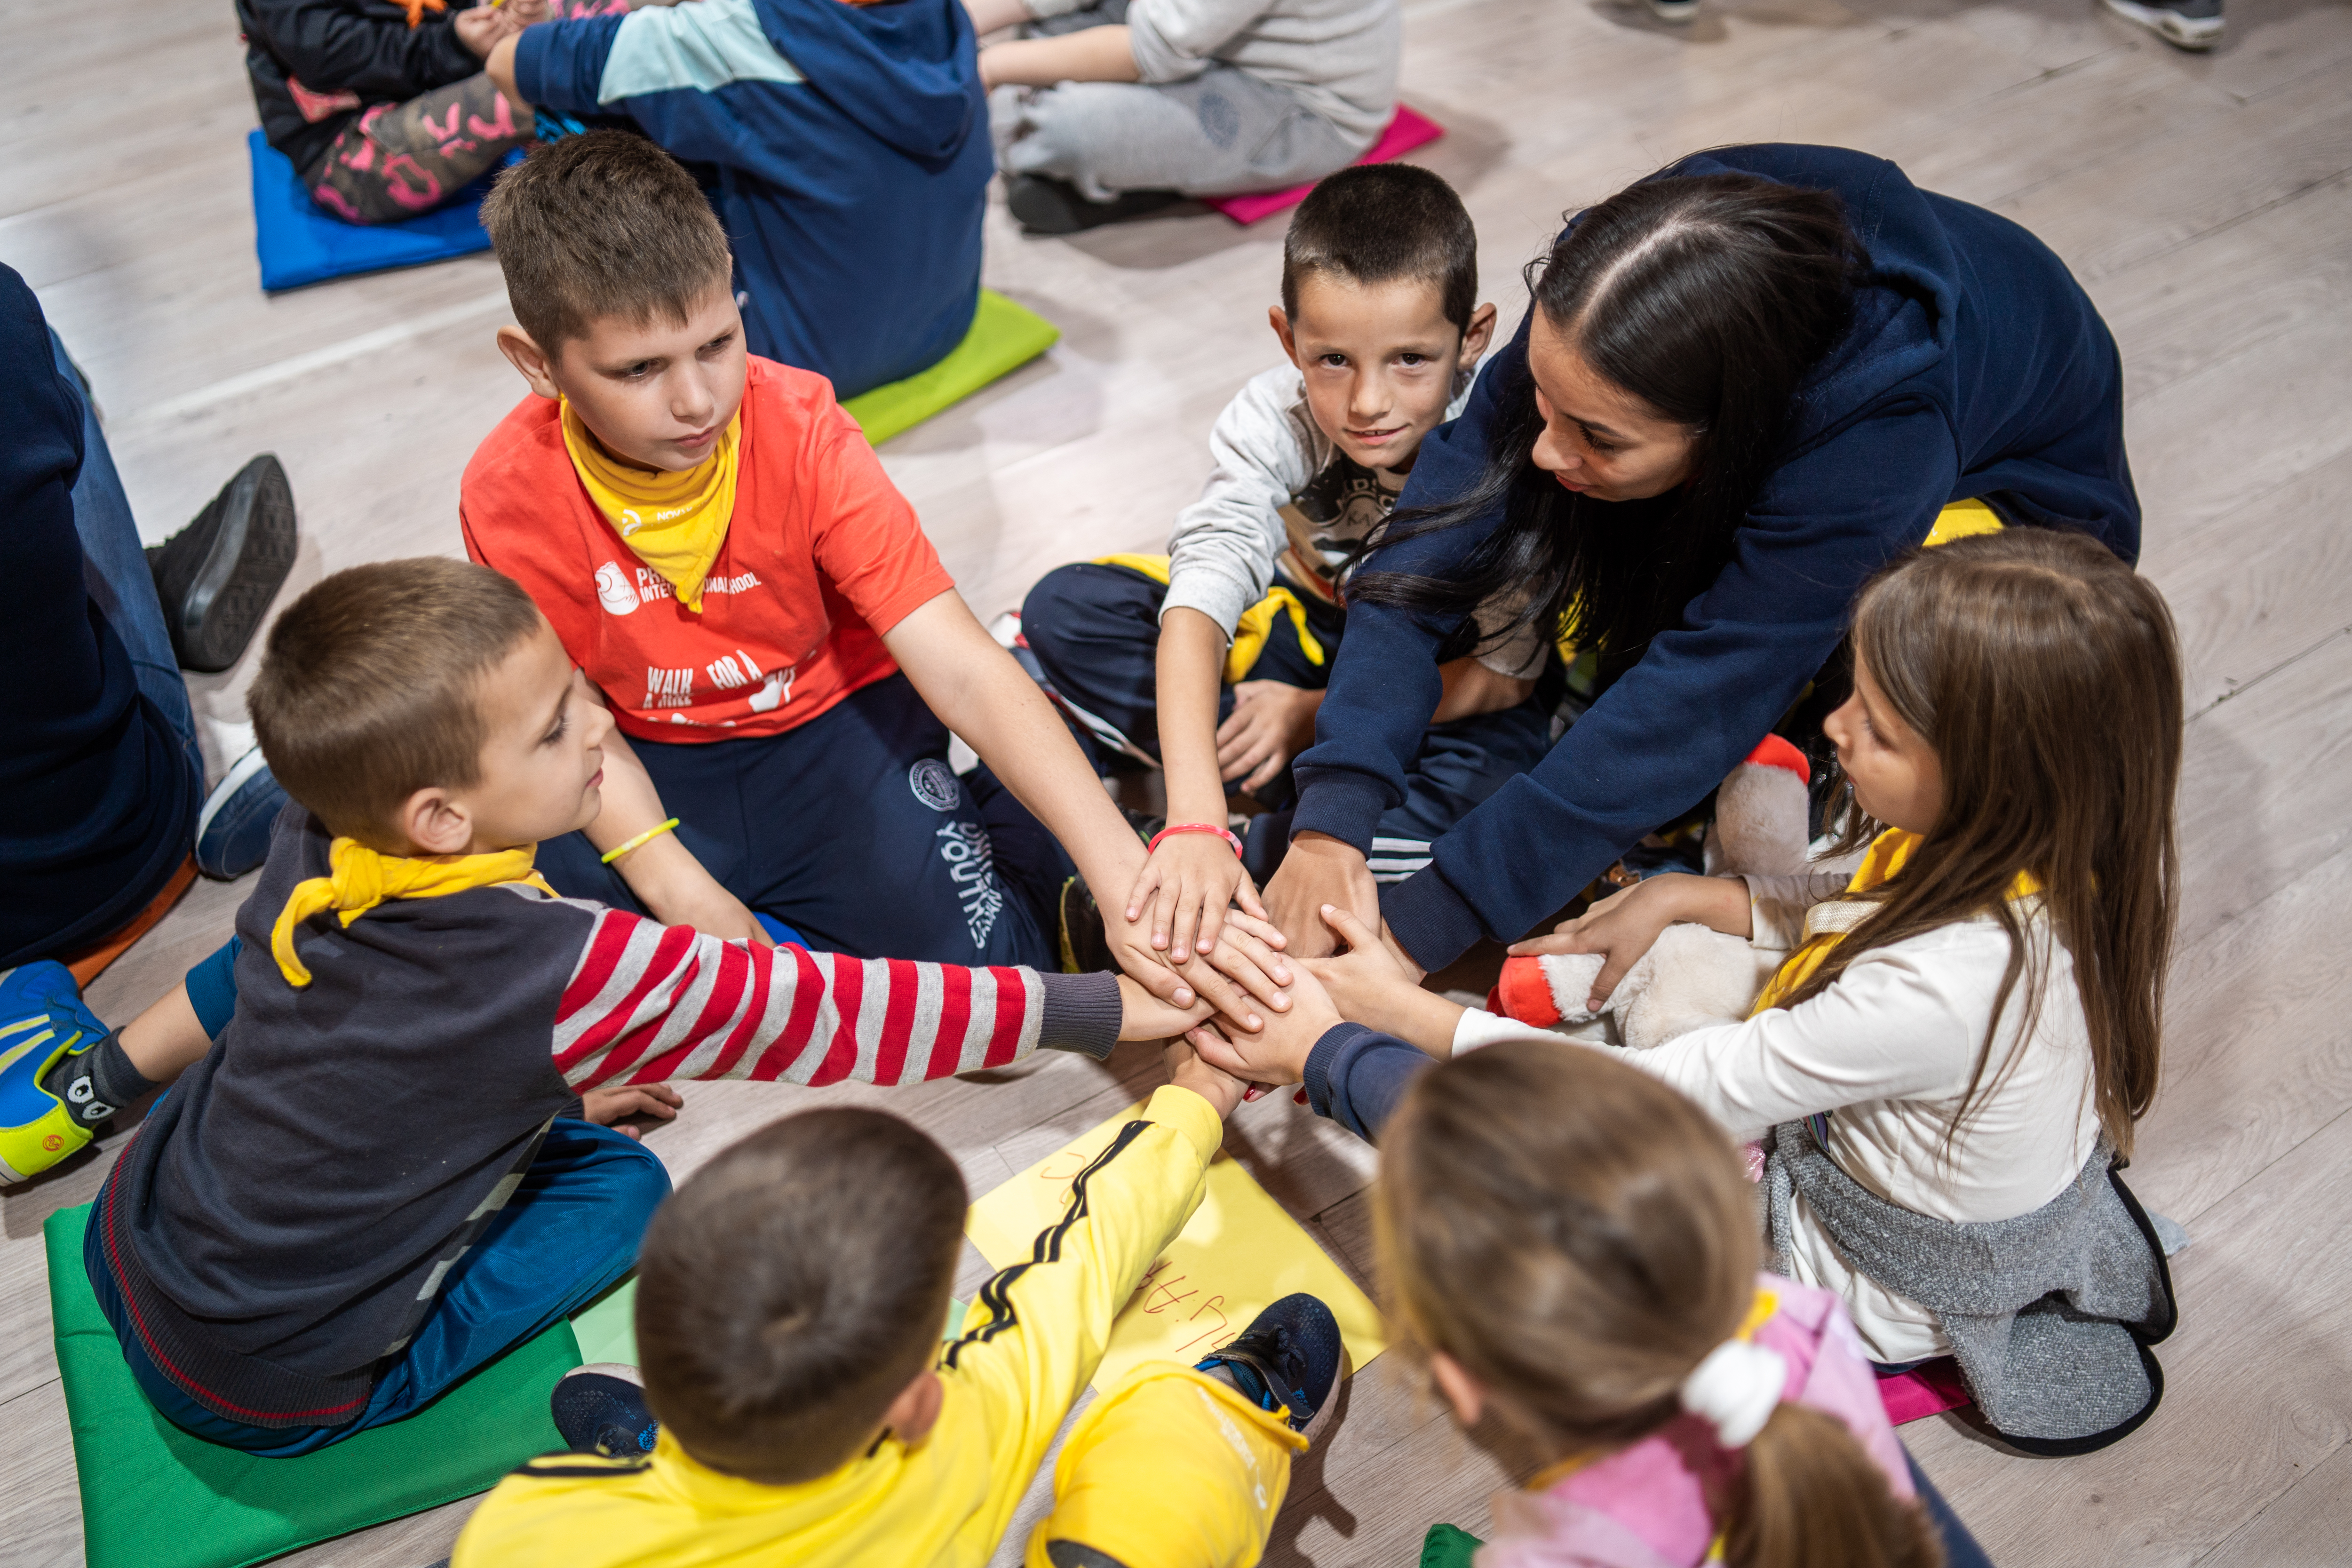 "You must not give up when you can really do something for the sake of the one who is watching you and following in your footsteps."  Our volunteer Kristina Vukomanovic and children during a quiz at the Friendship Games